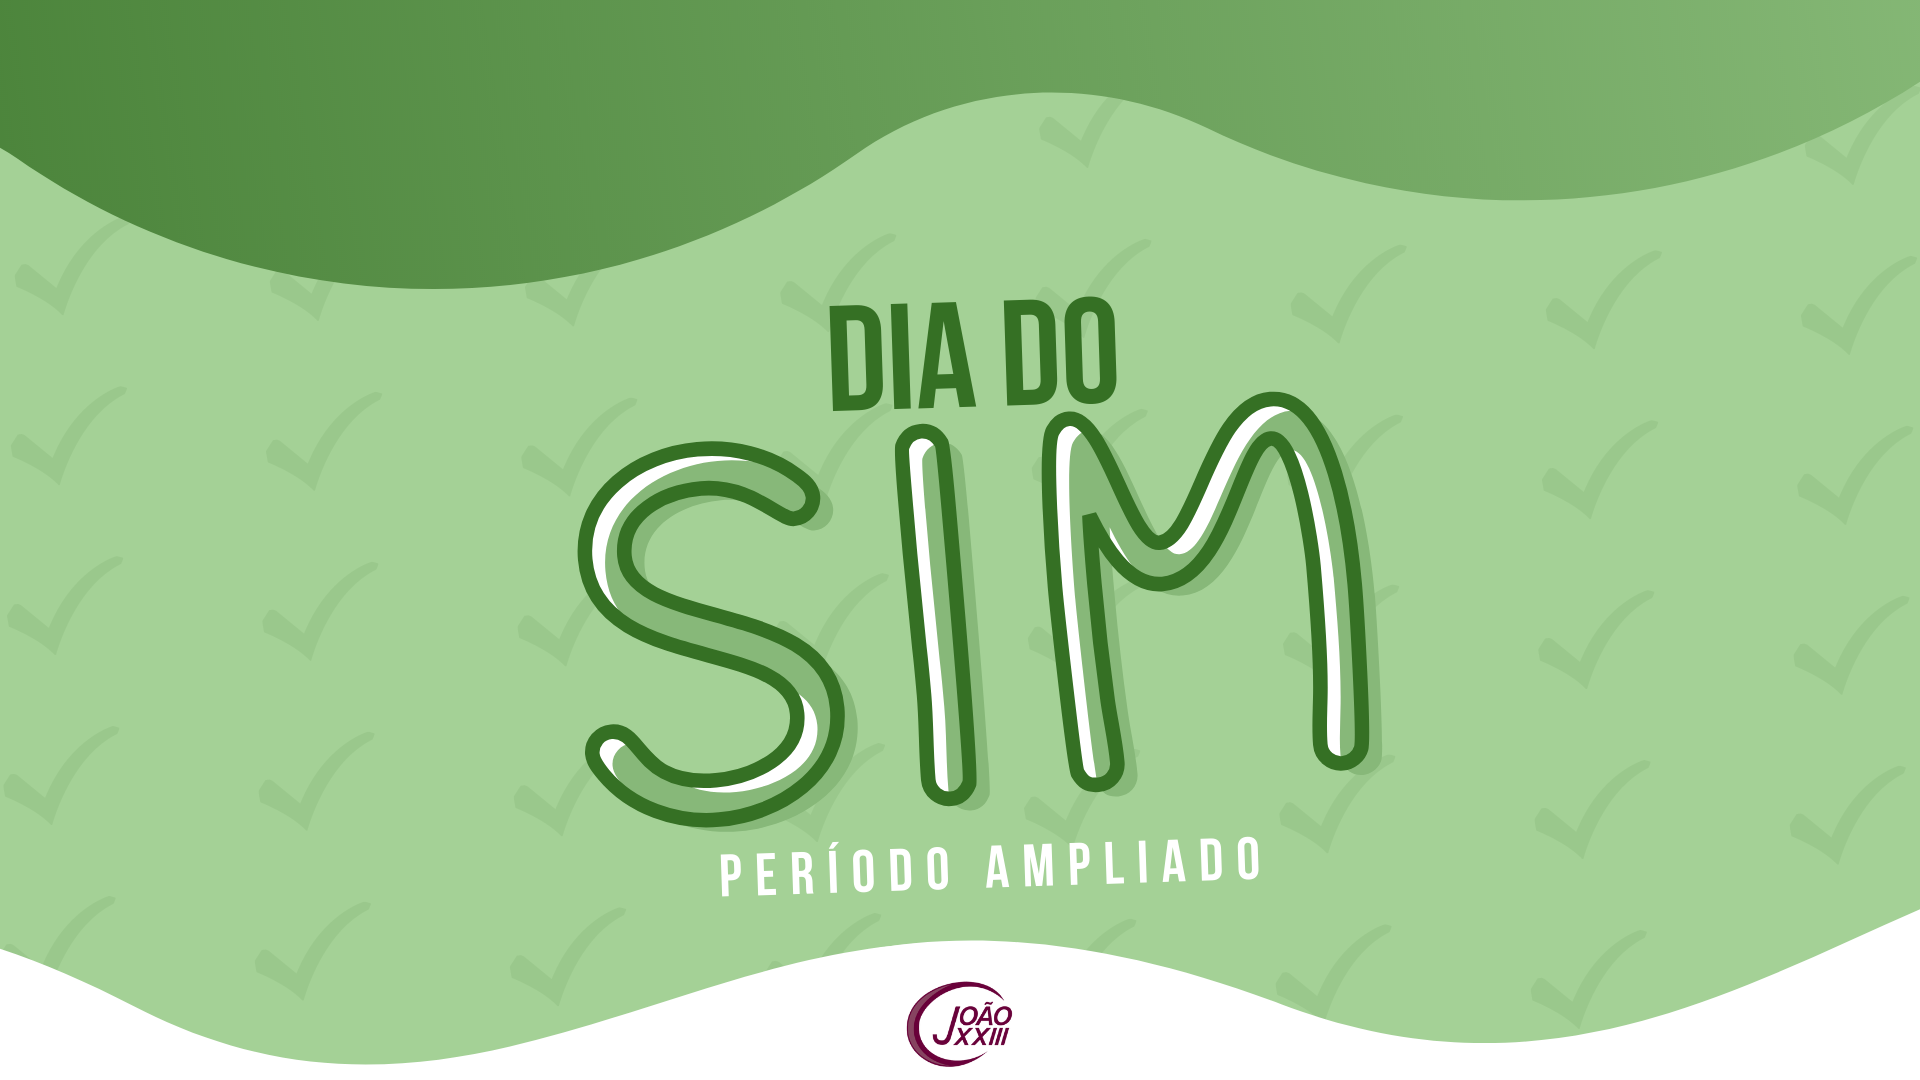 You are currently viewing Dia do Sim!